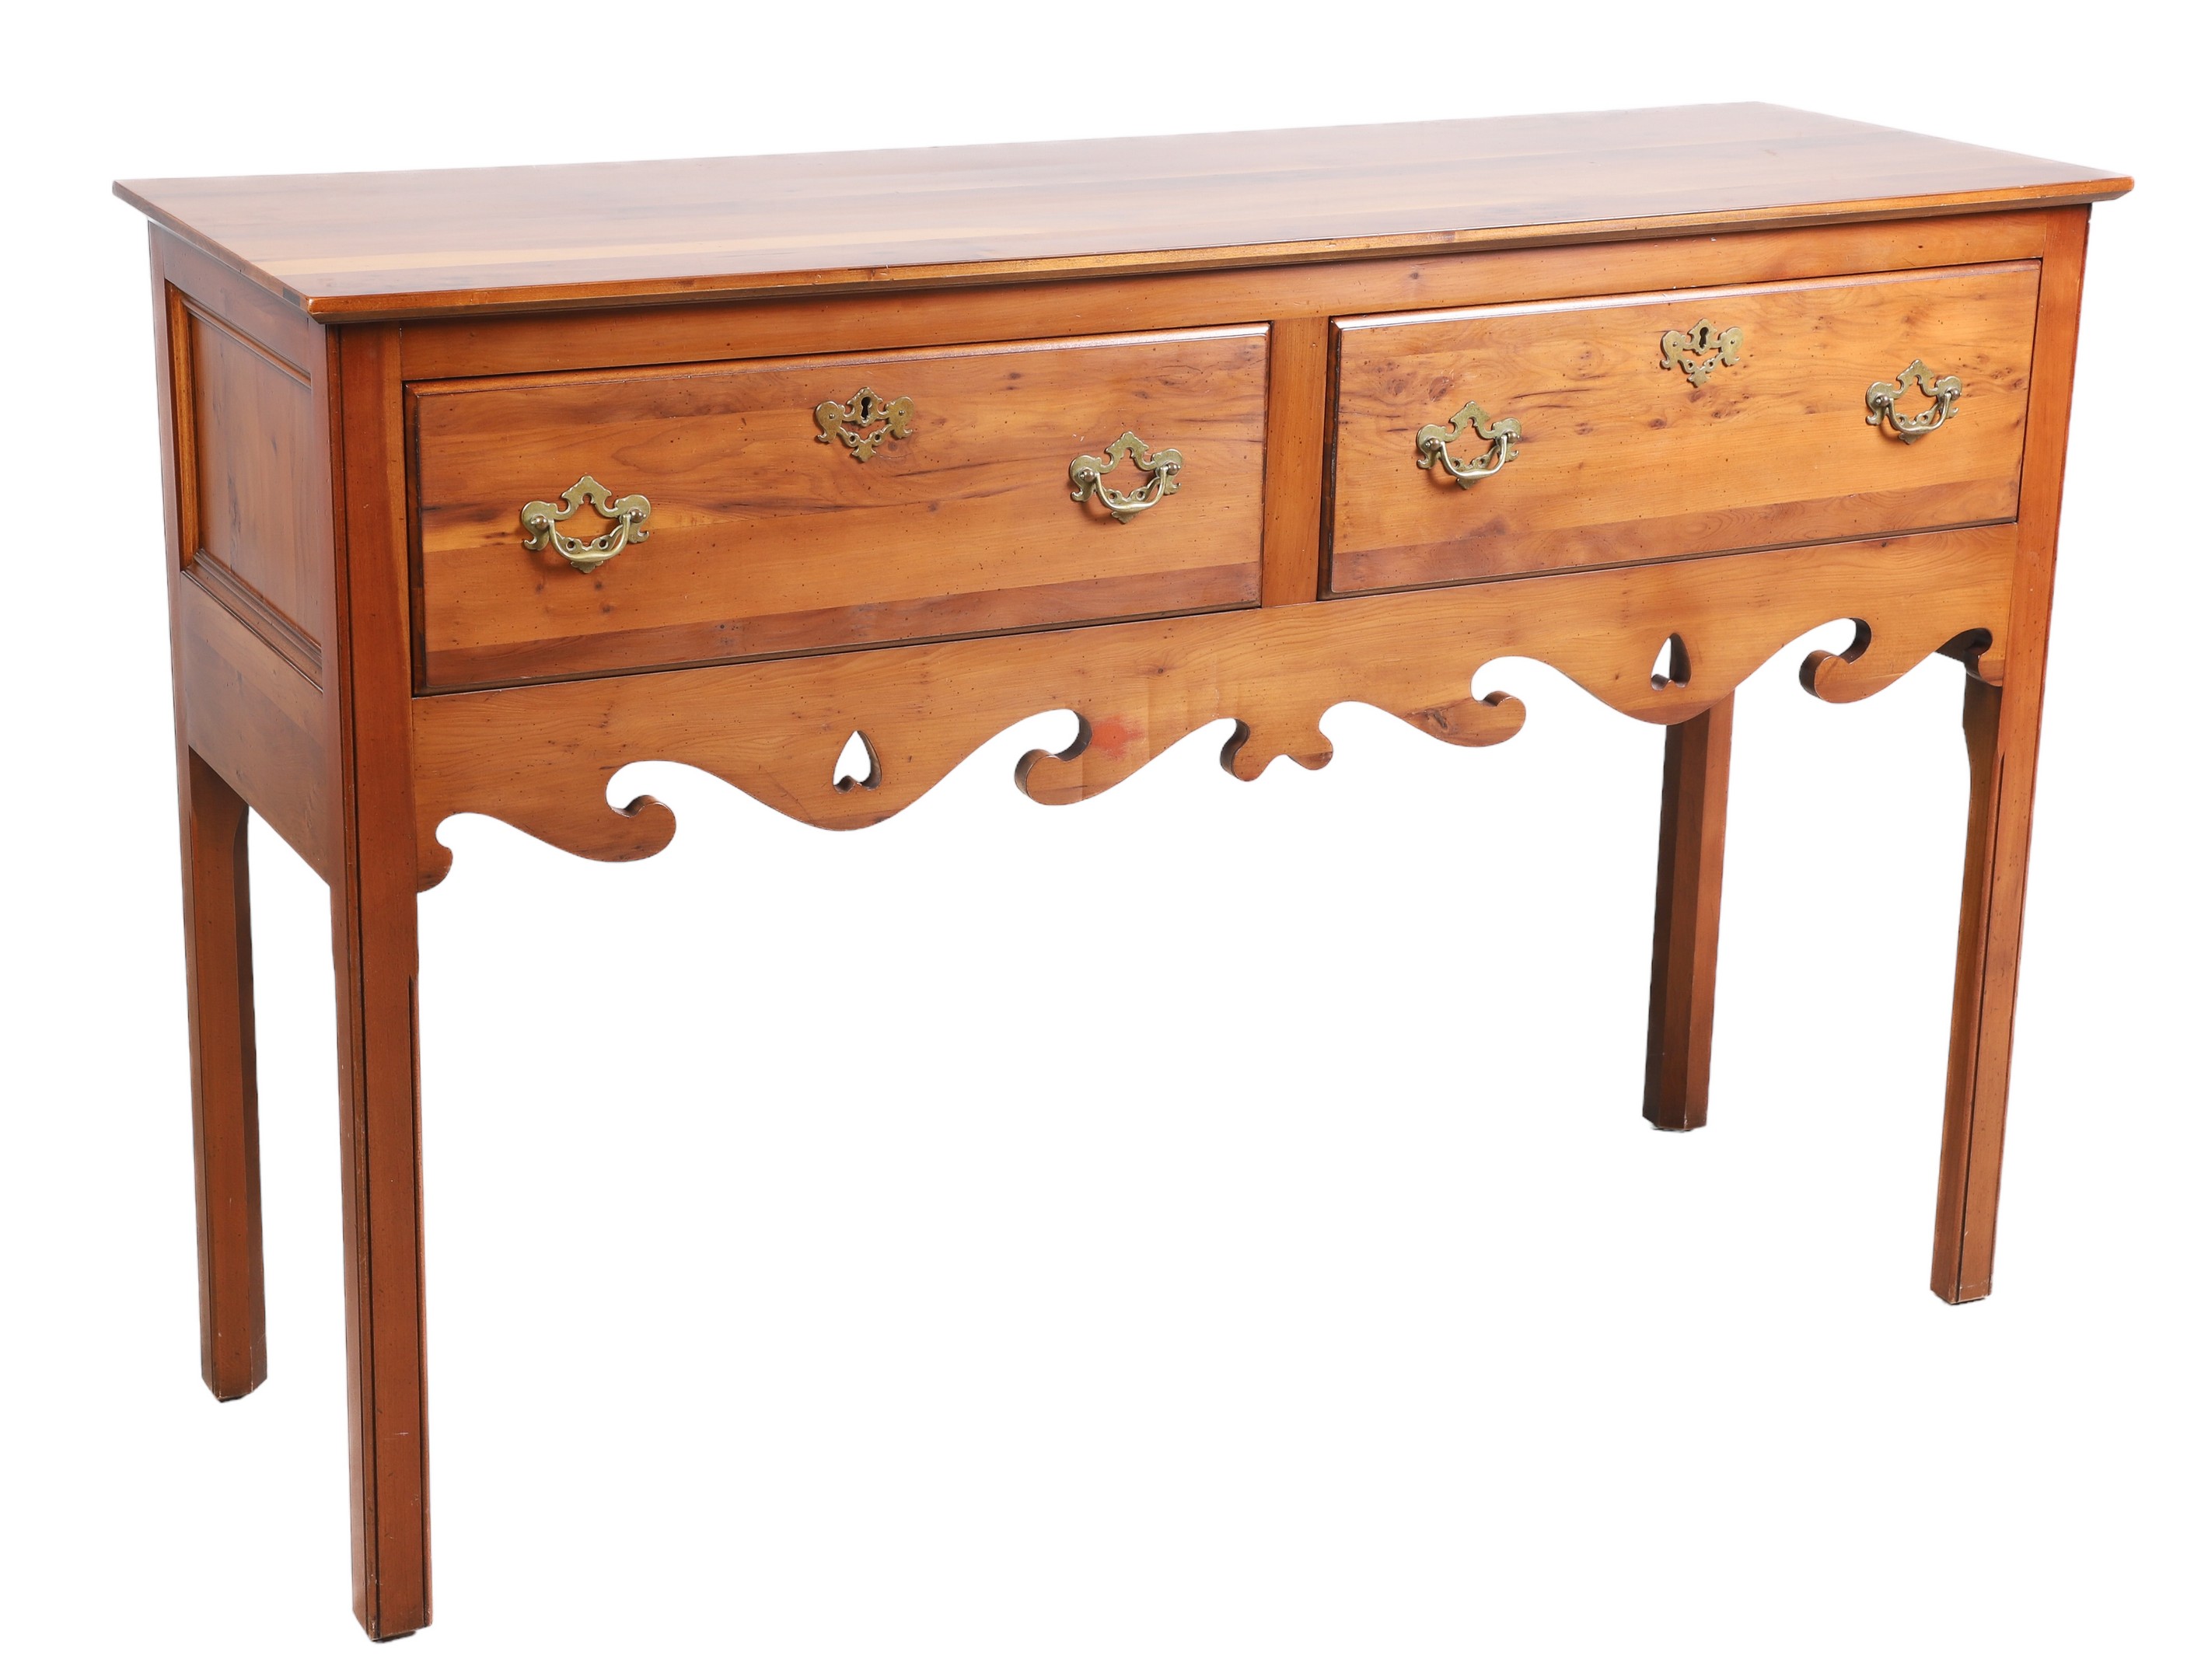 Wright Table Co cherry sideboard,